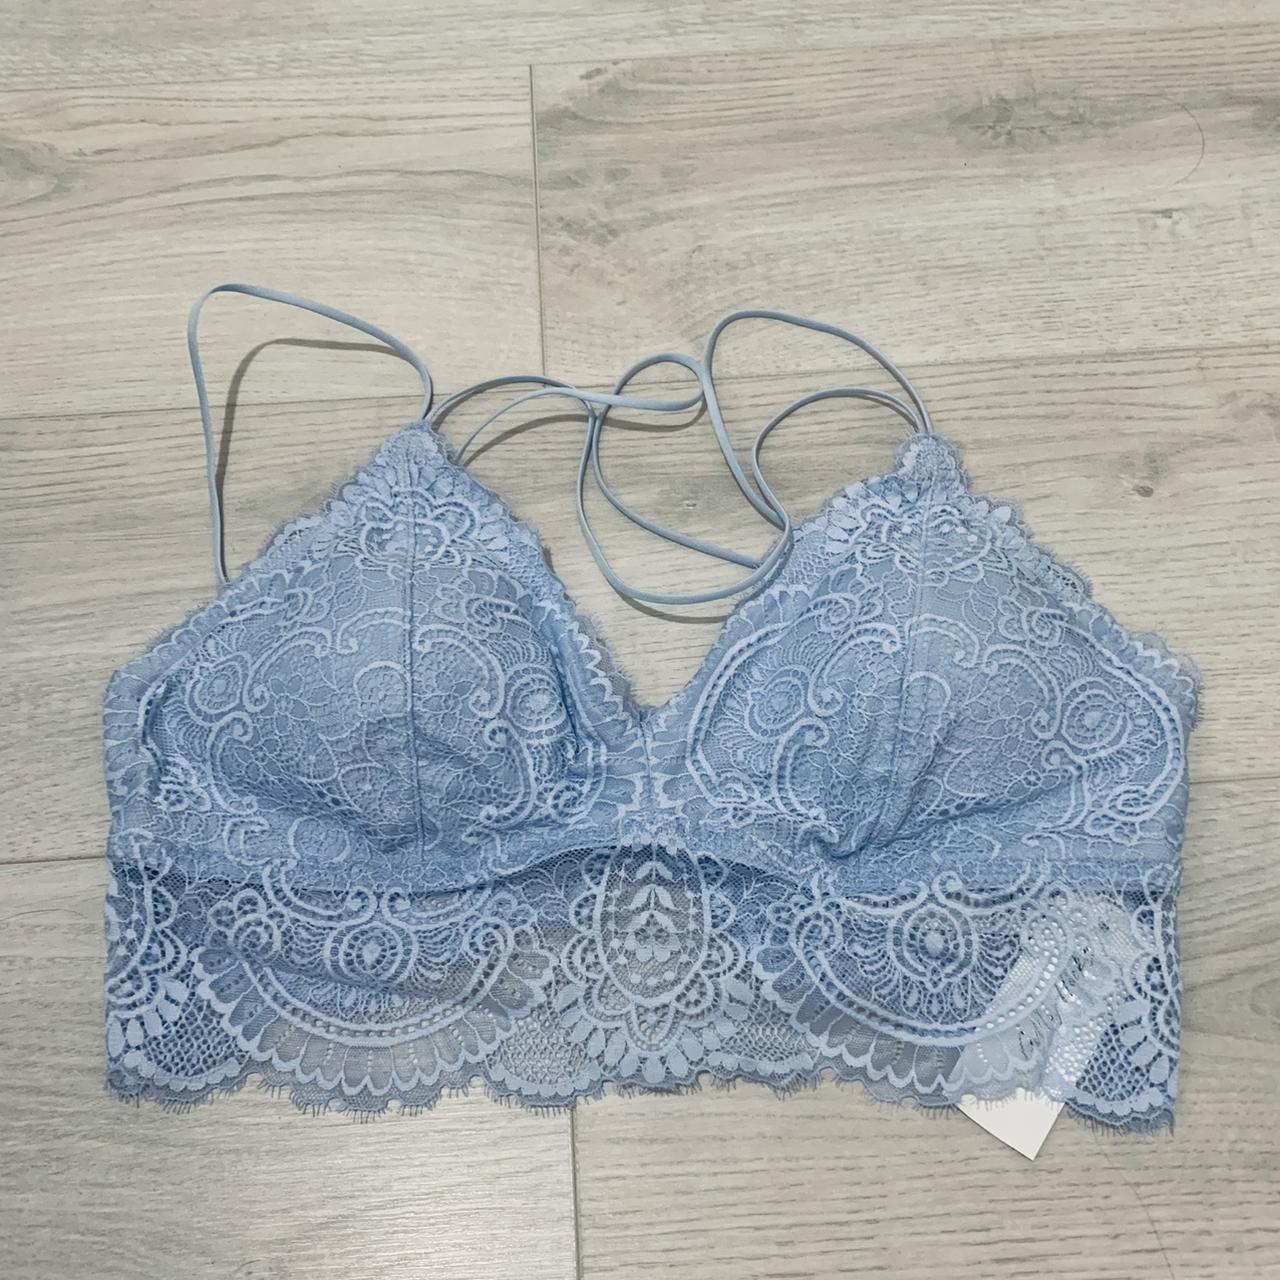 Gilly Hicks Light Blue Lace Bustier Bralette Top Size M - $19 - From